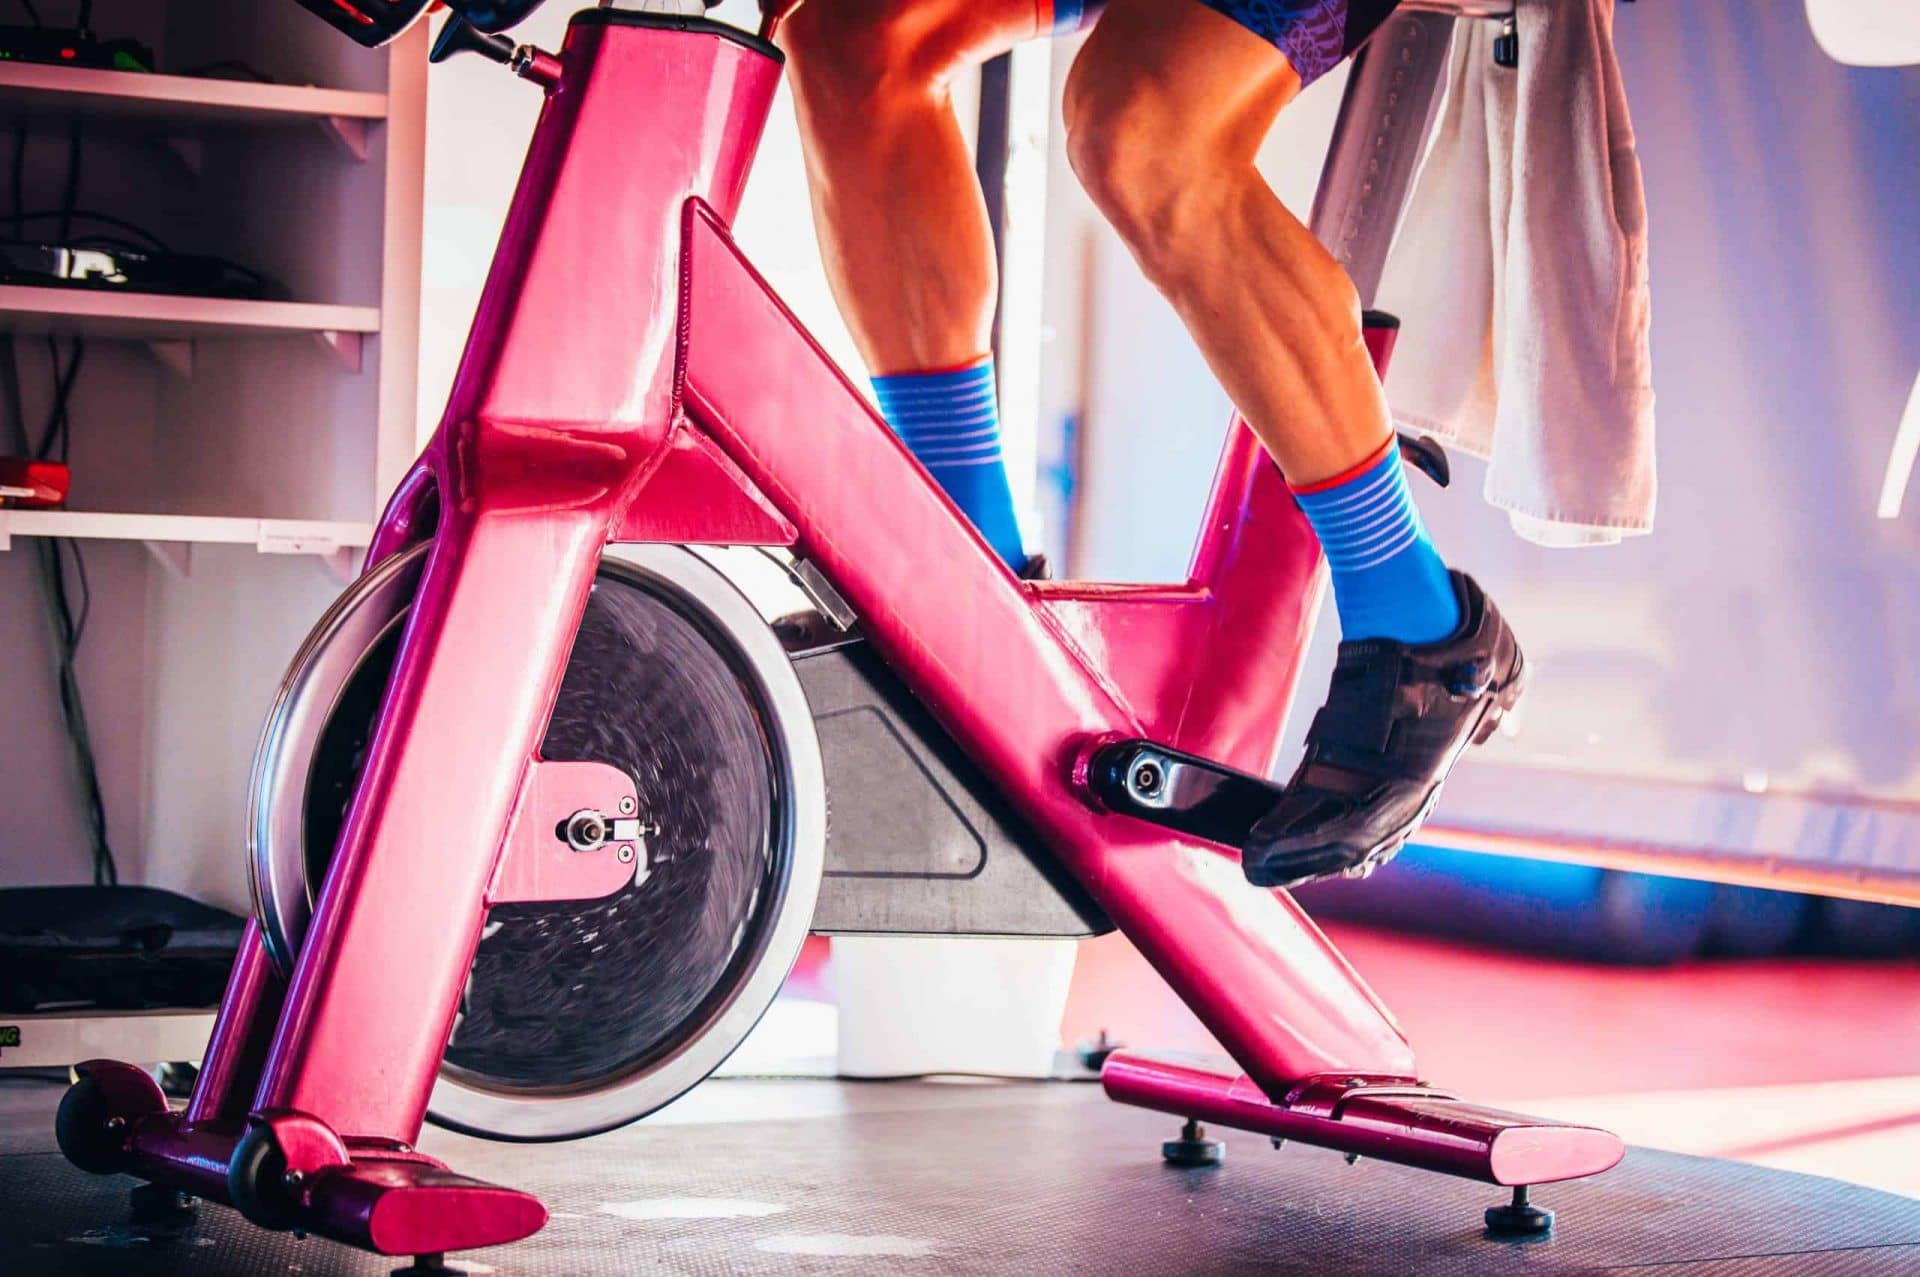 Image of a man in blue socks on a pink spin bike